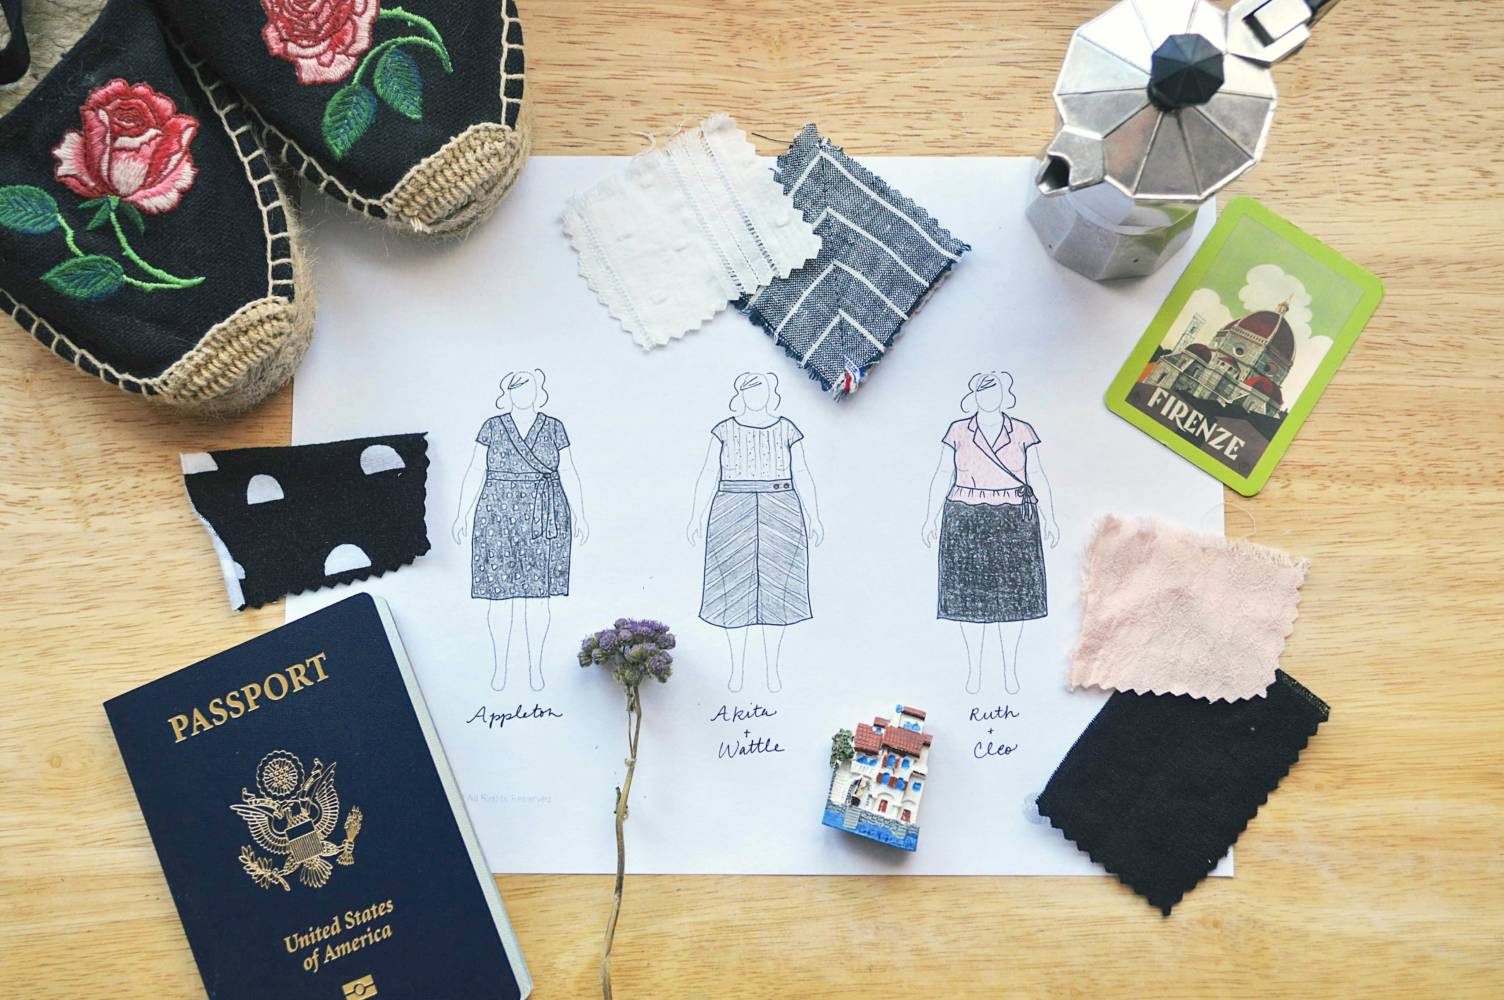 Whitney @whitneygetsdressed used the 3-model page from her MyBodyModel fashion sketchbook to sketch out neutral outfit combinations and picture her travel wardrobe.